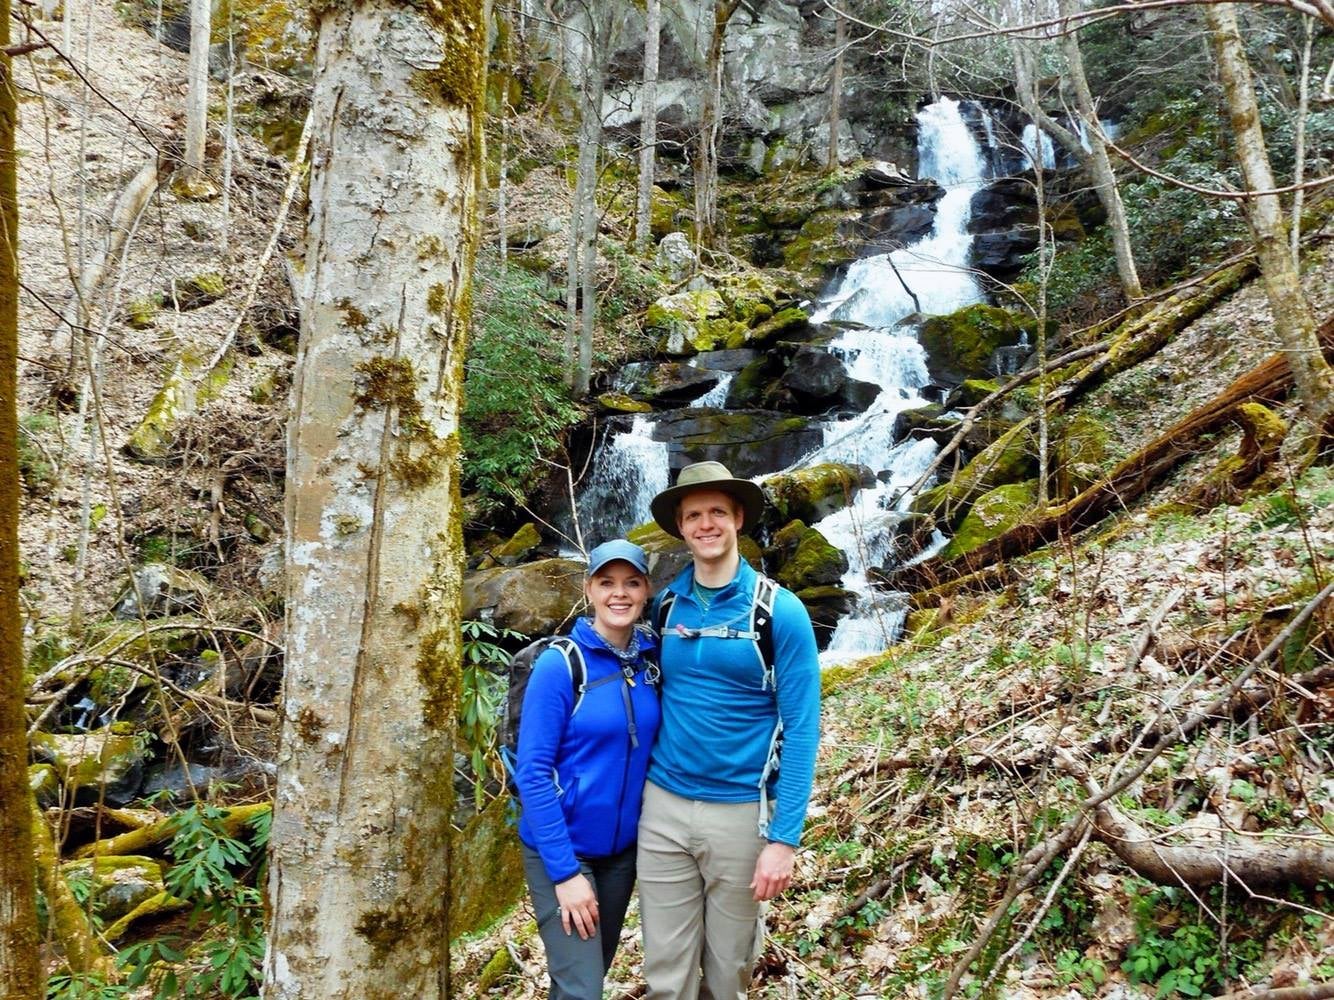 Two people posing with waterfall and trees behind them